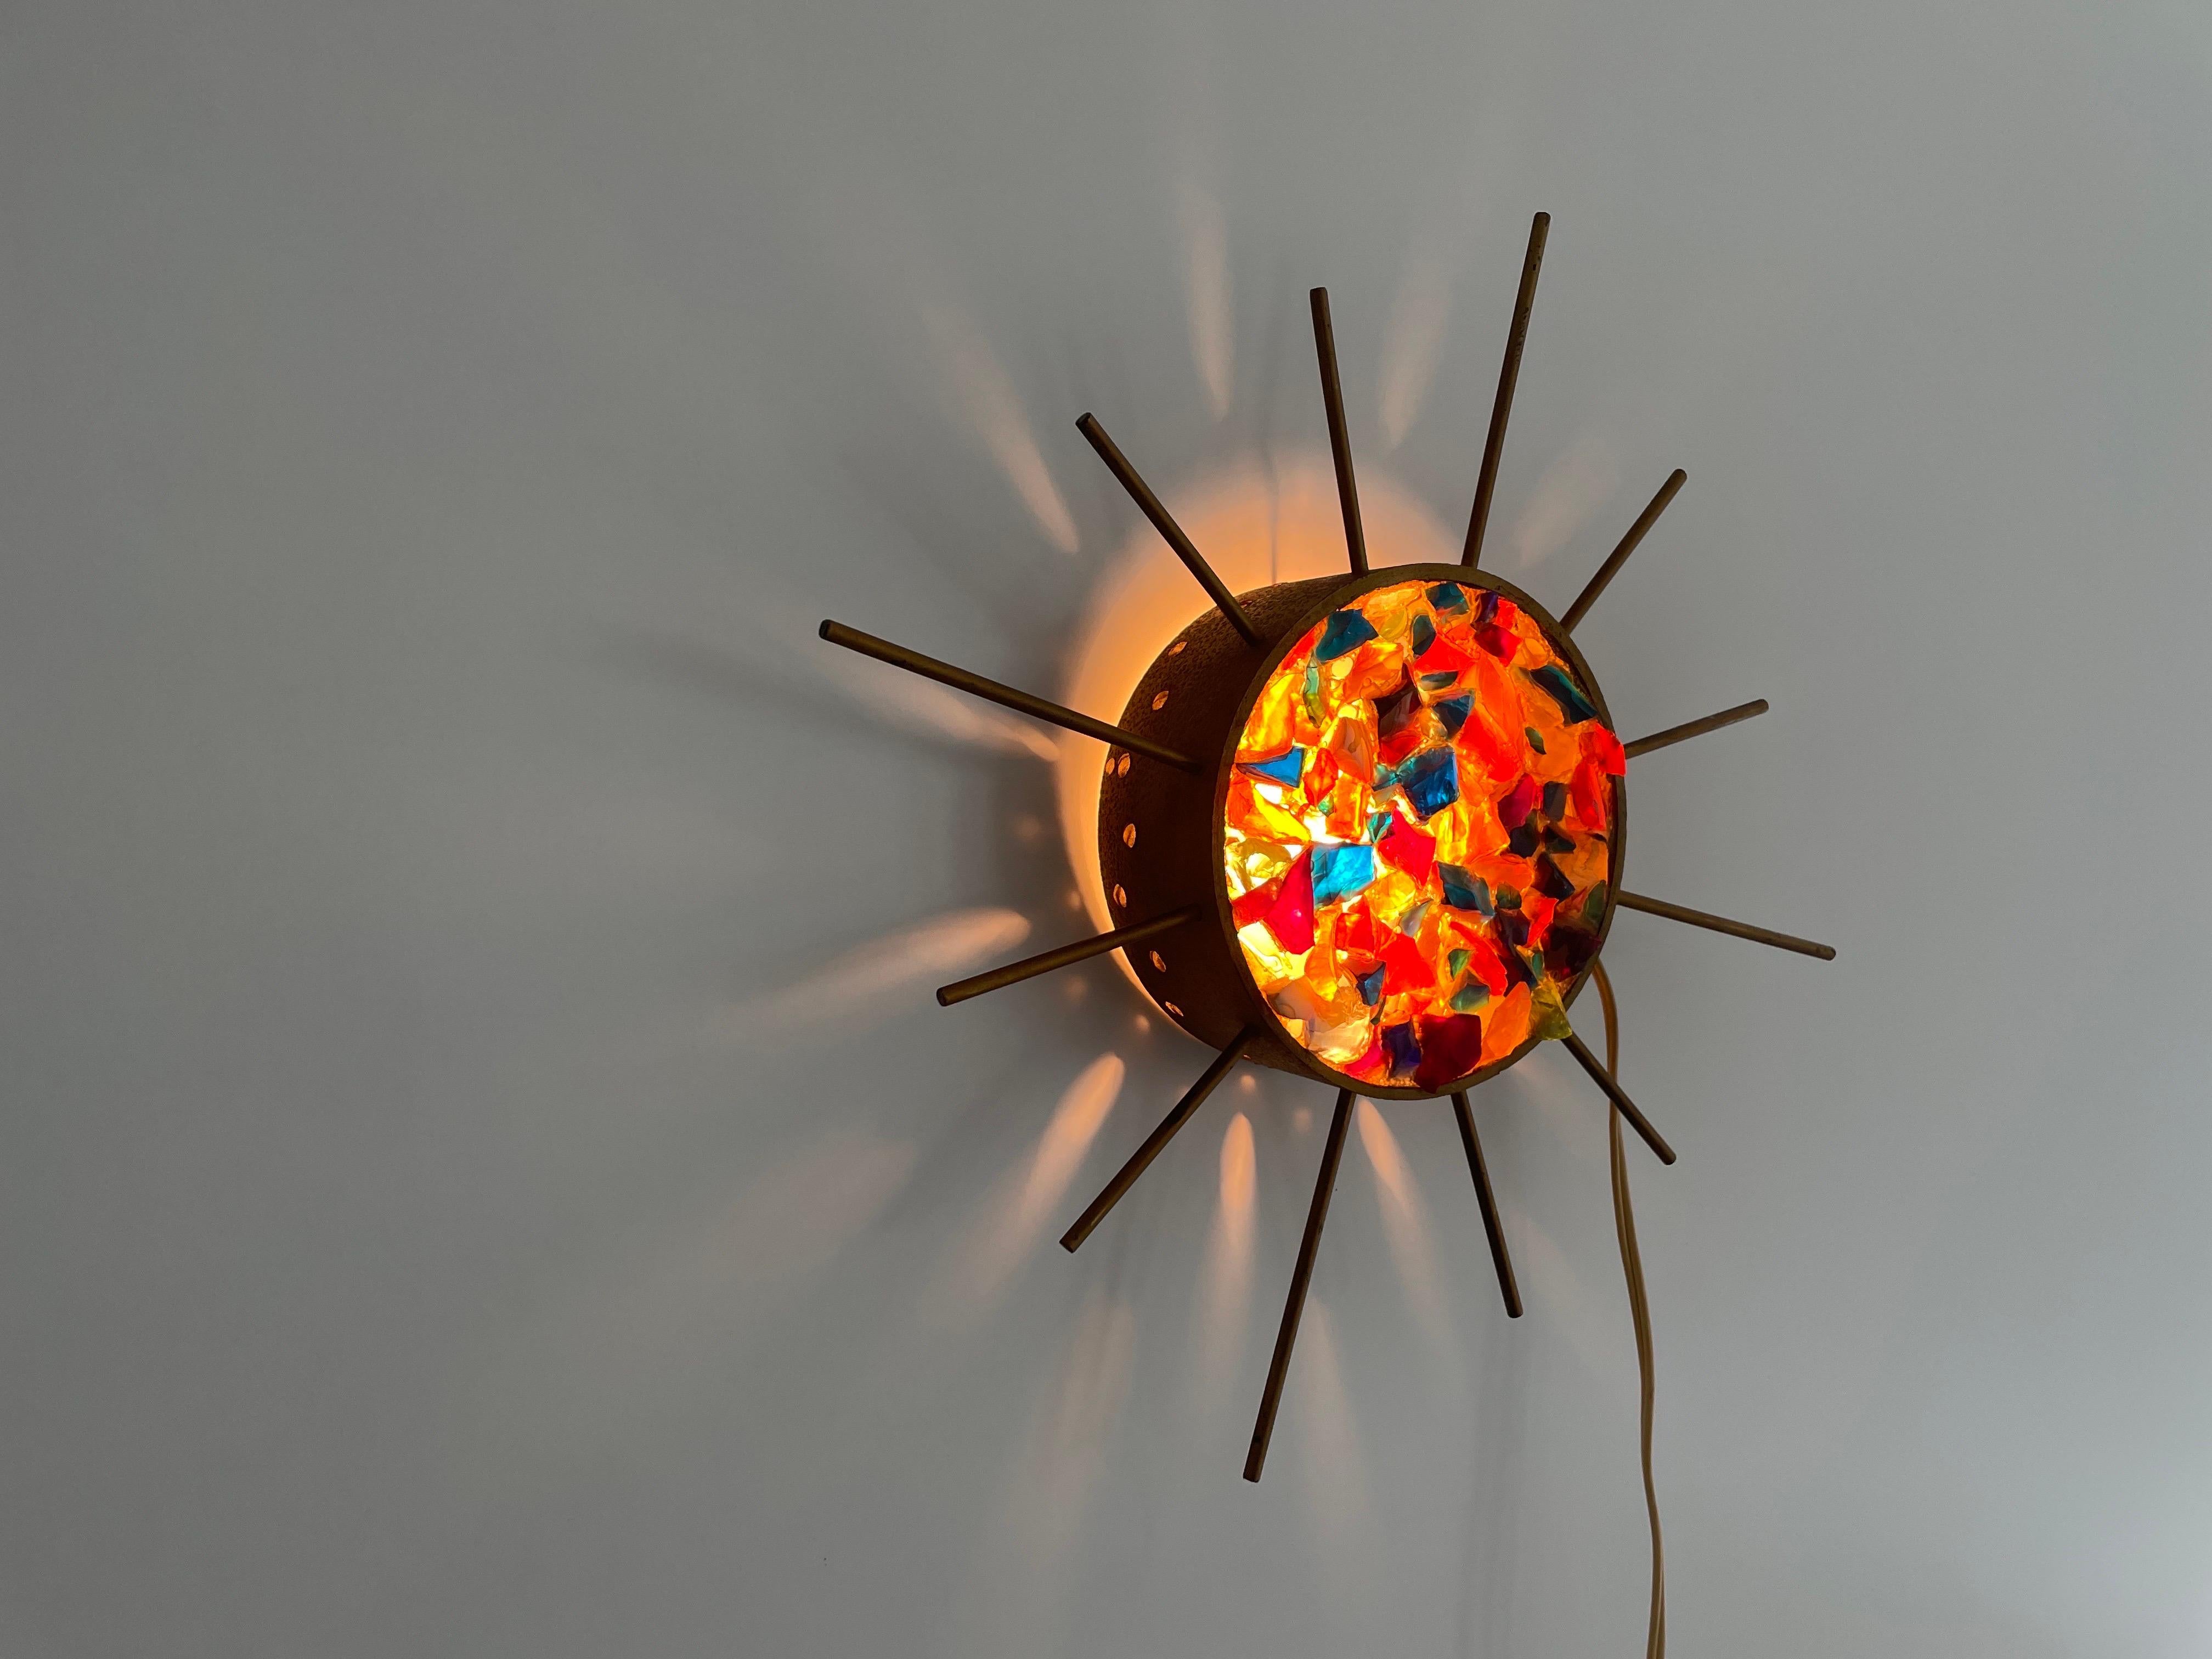 Sunburst Design Colorful Glass Pieces in Stone Form Wall Lamp, 1960s, Germany For Sale 2